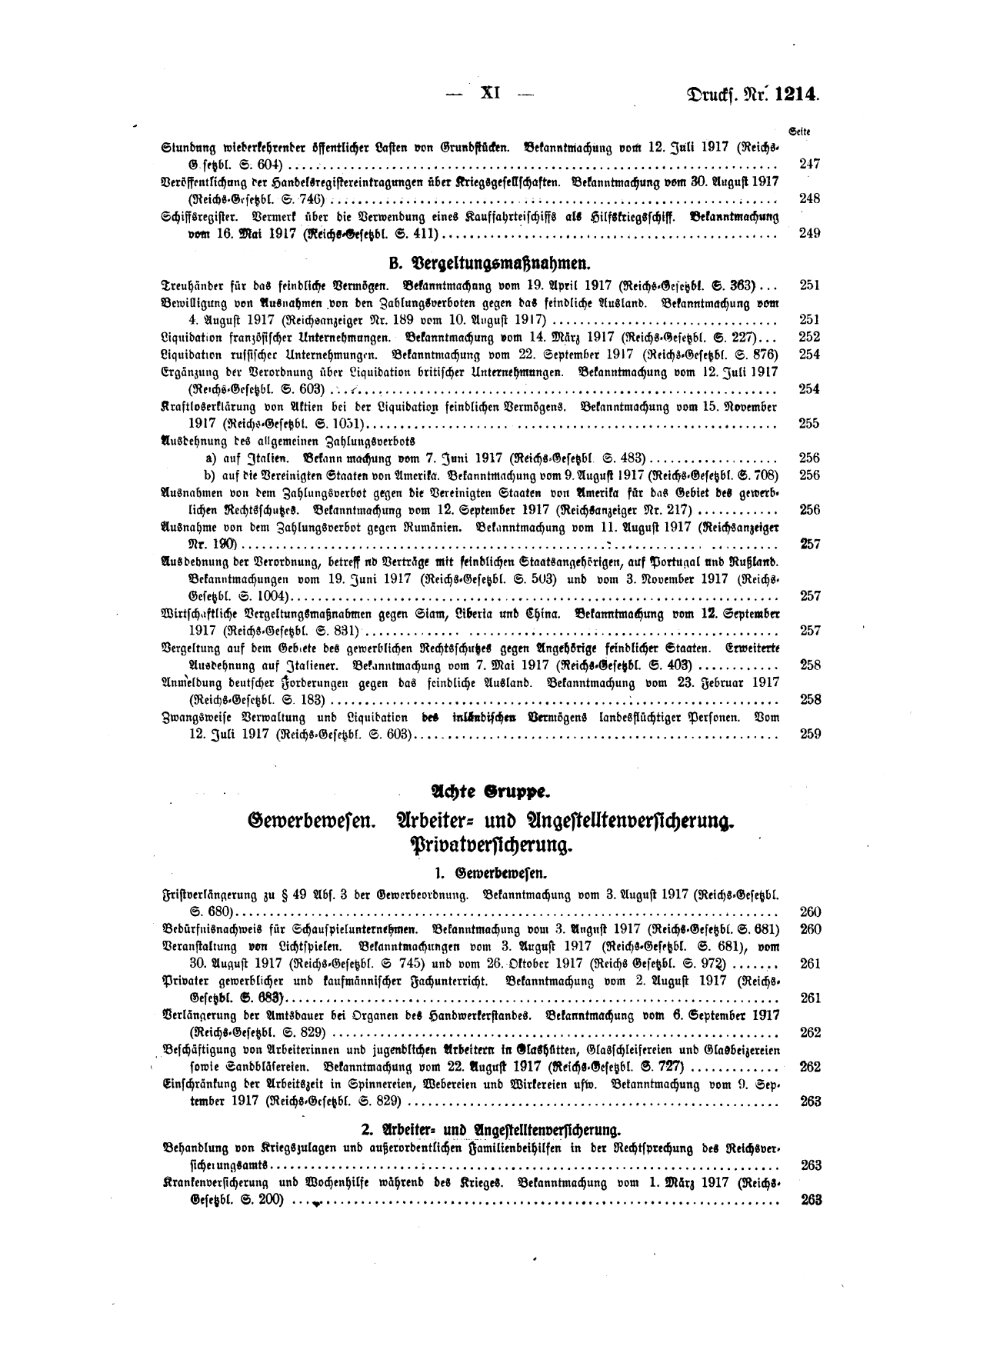 Scan of page XI